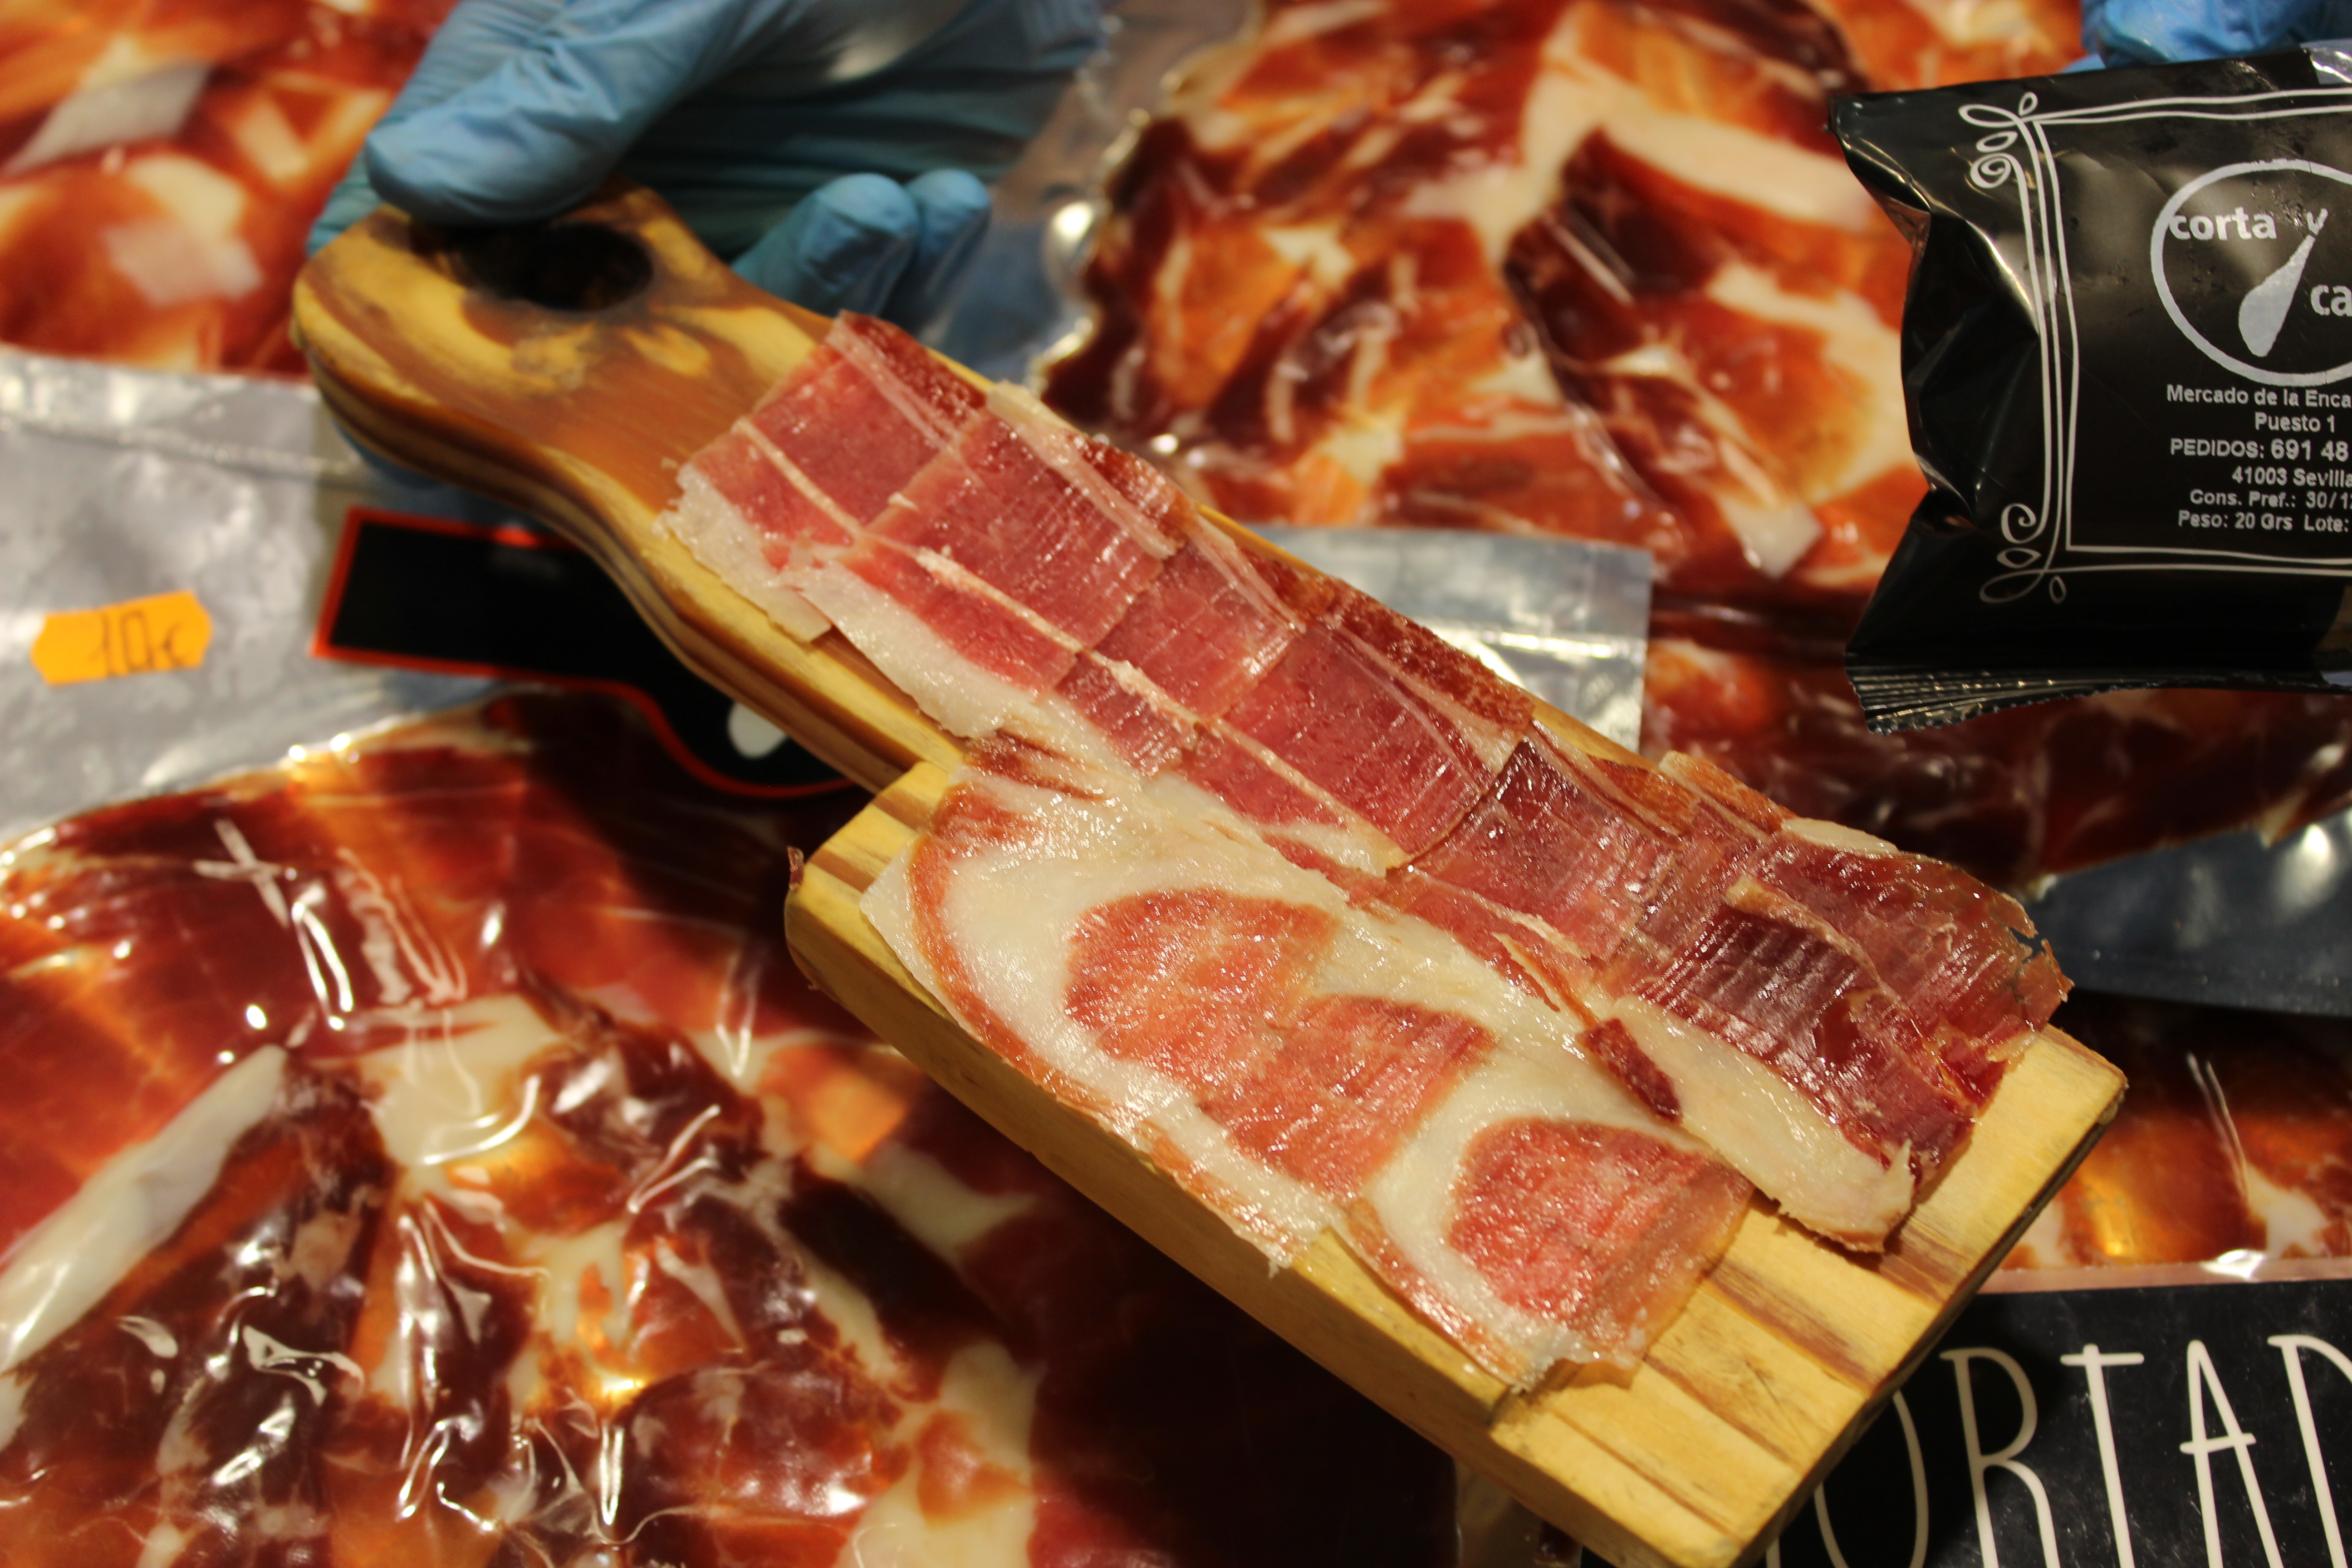 Sliced Spanish ham on a tray in Seville.